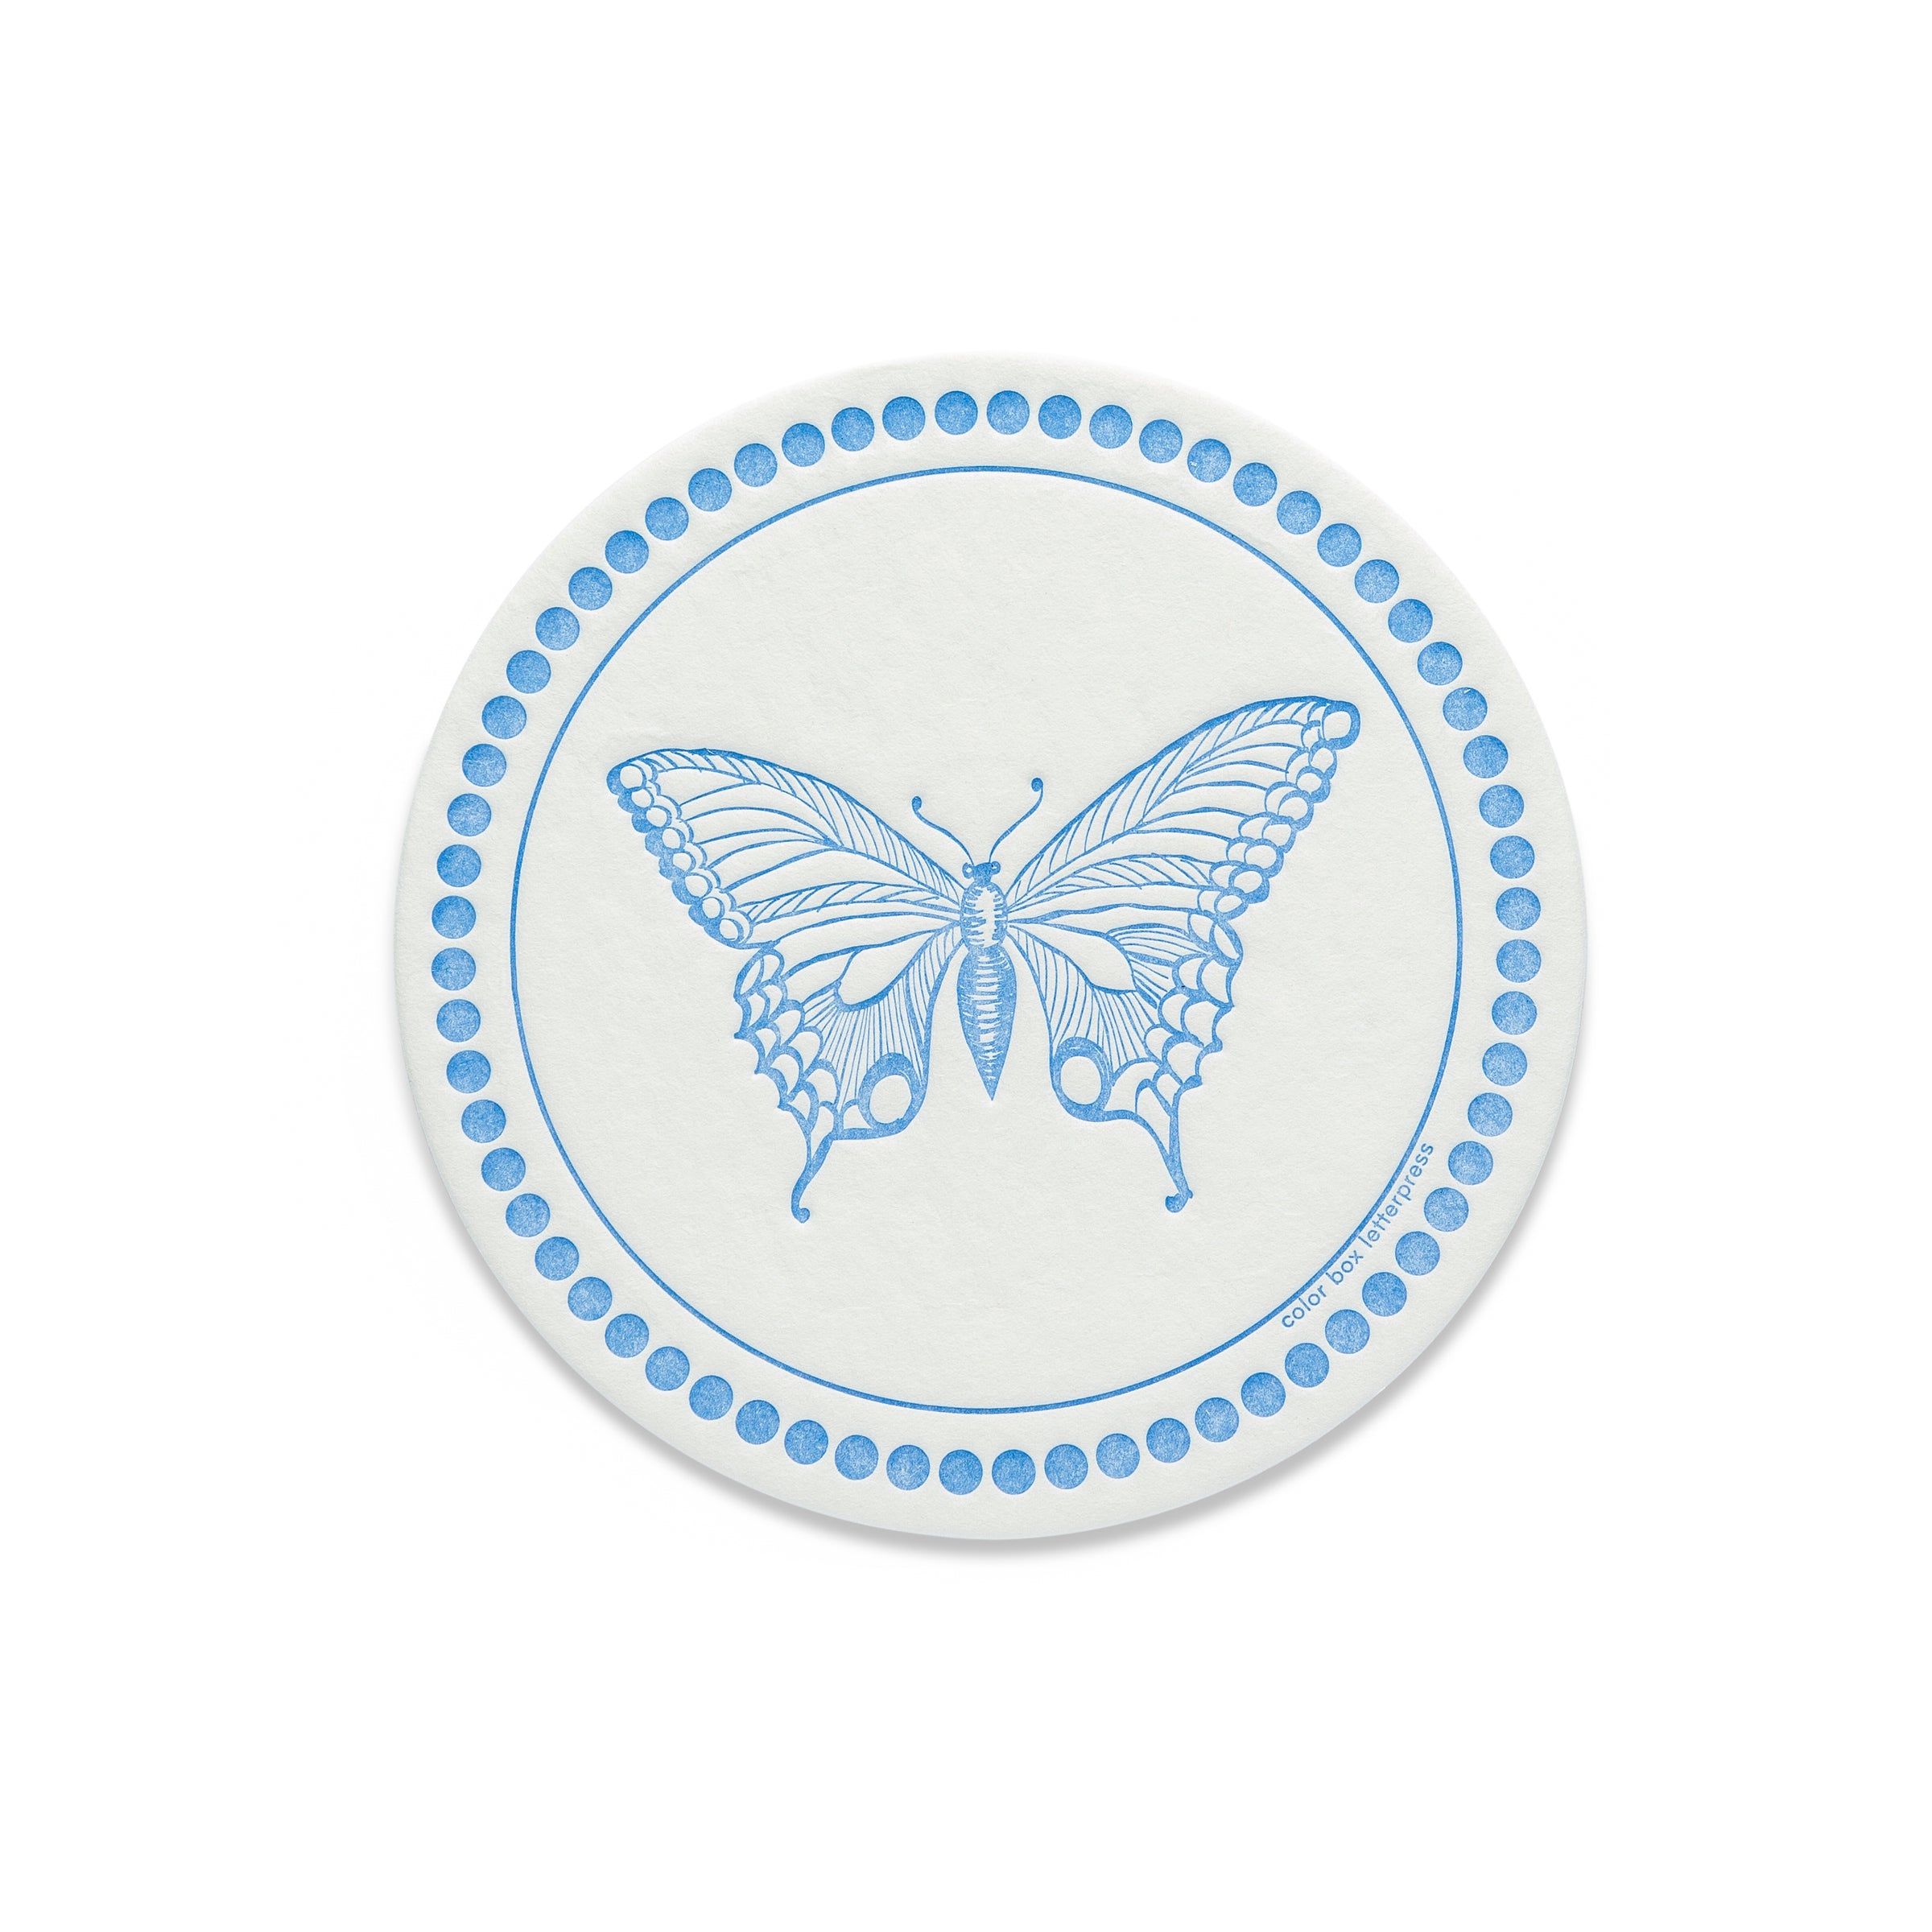 Extra Thirsty Coasters | Butterfly